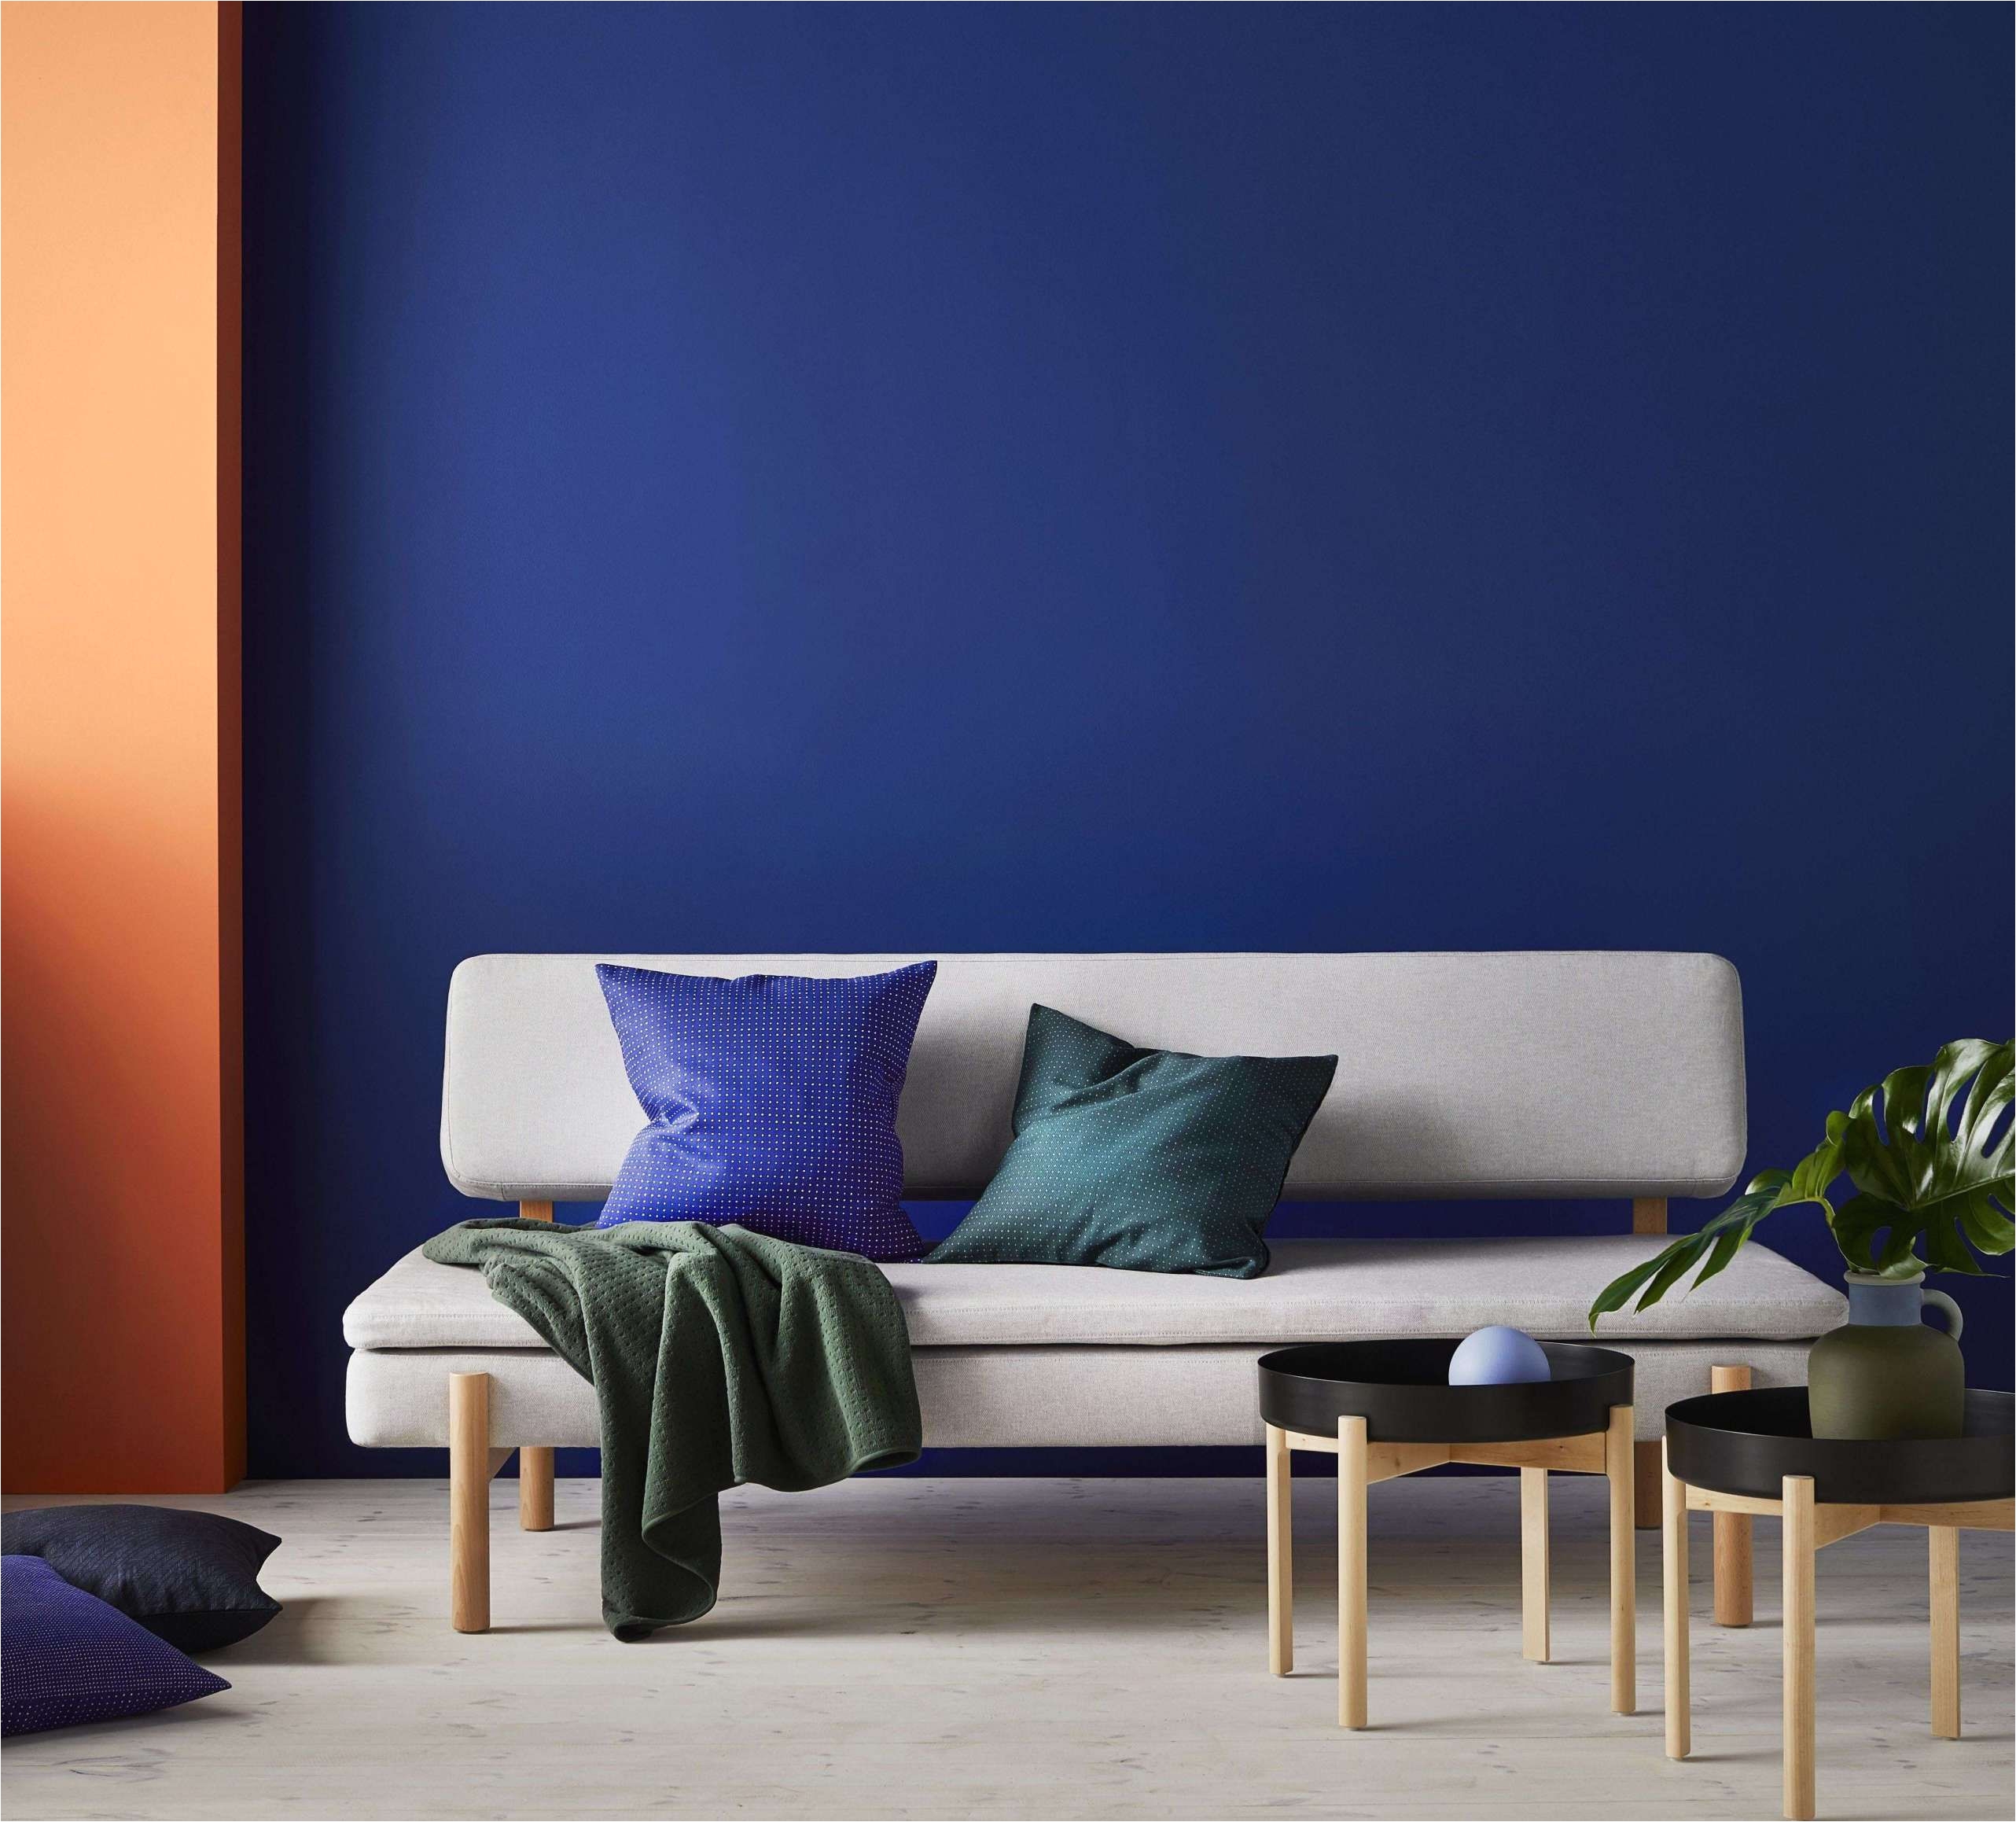 Blue and orange Living Room 29 Unique Painting Ideas for Living Room Walls